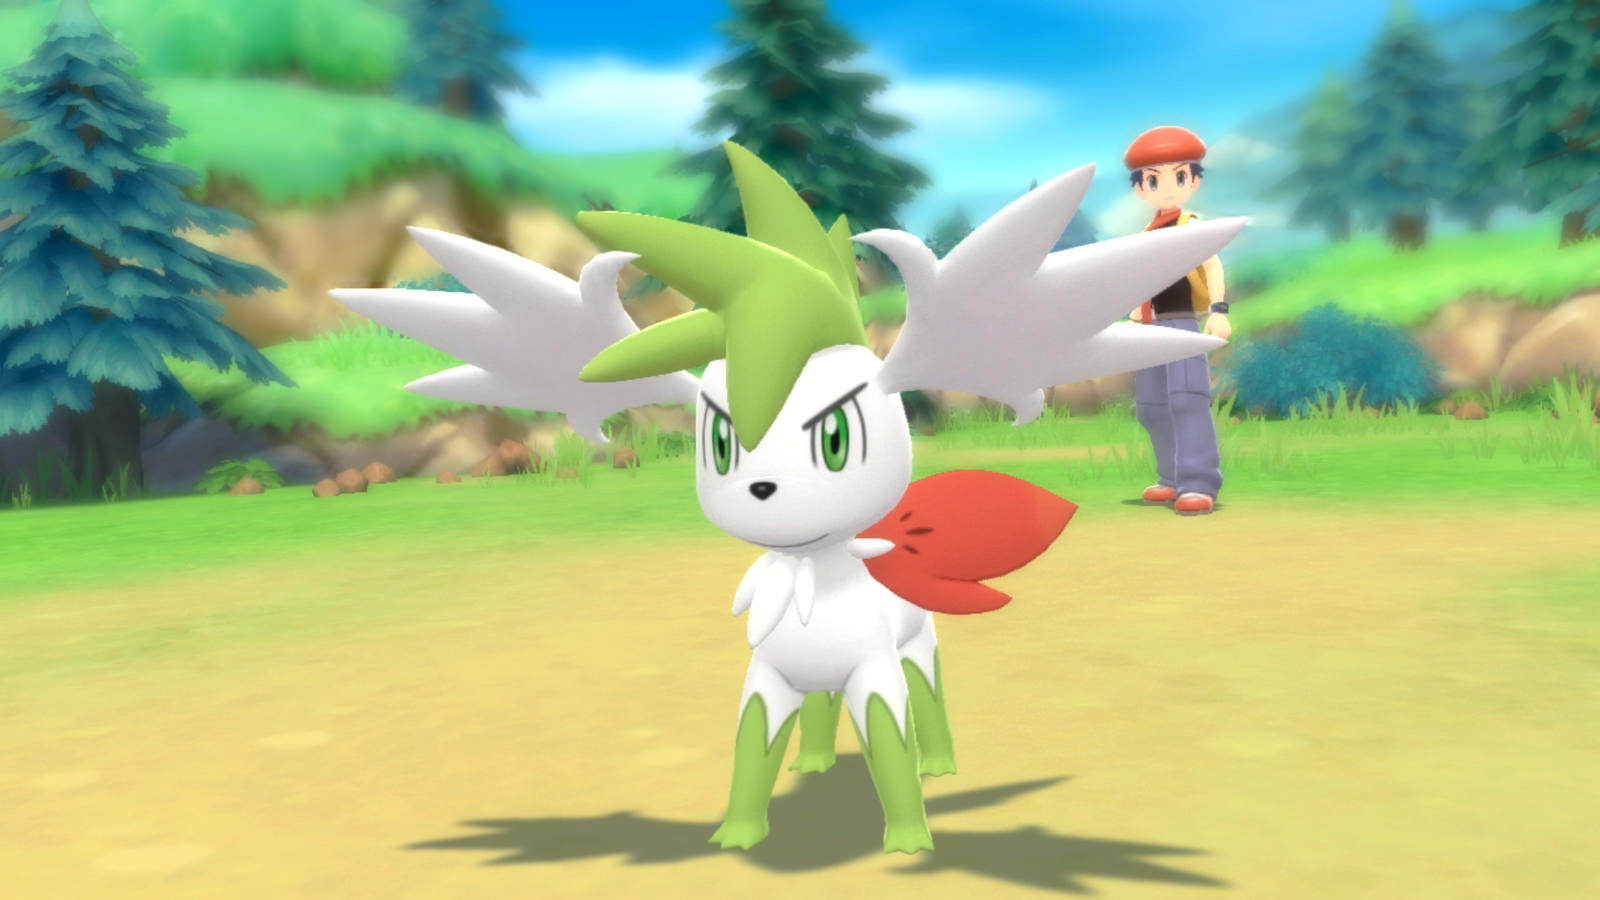 Pokémon Brilliant Diamond And Shining Pearl: Mythical Shaymin Mystery Gift  Available Today - Game Informer